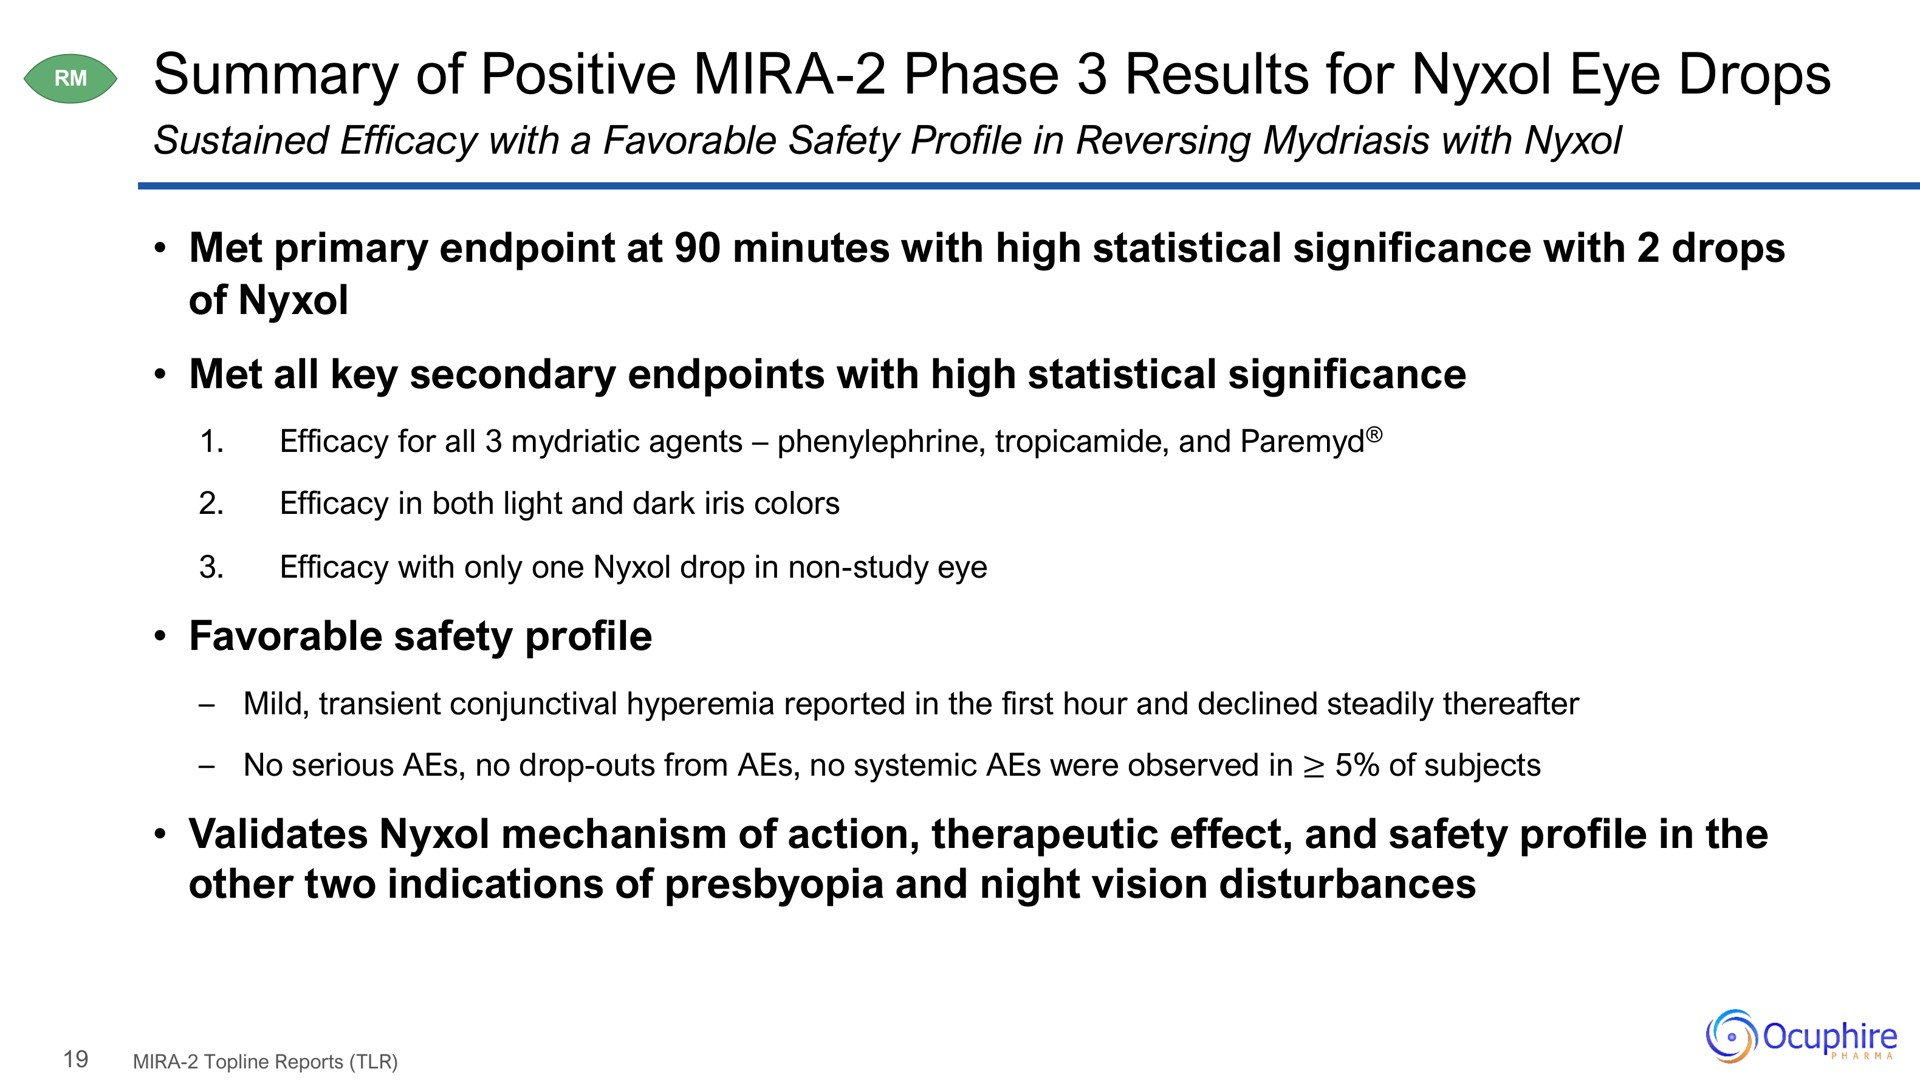 summary of positive phase results for eye drops | Ocuphire Pharma